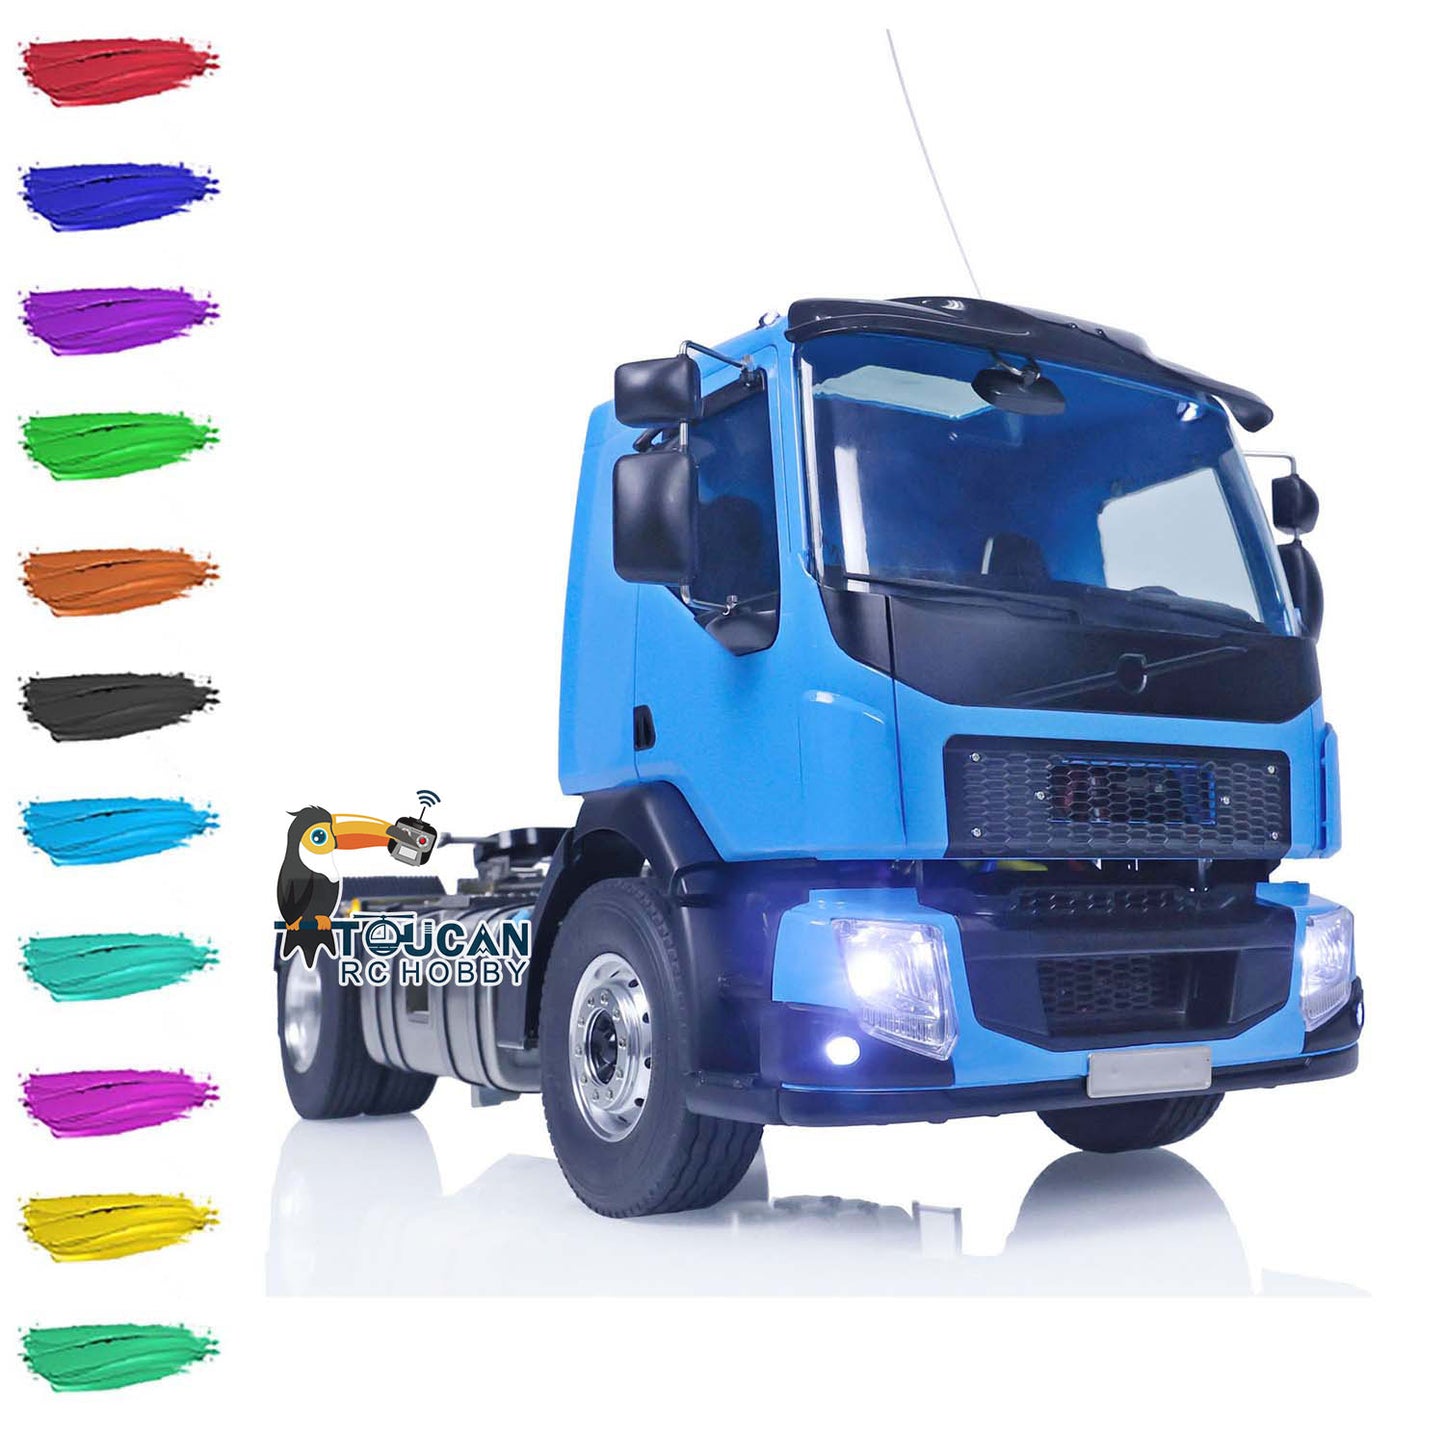 LESU 4x4 RC Tractor Truck 1/14 RTR Painted Assembled Radio Controlled Car Light Battery Metal Chassis ESC Motor